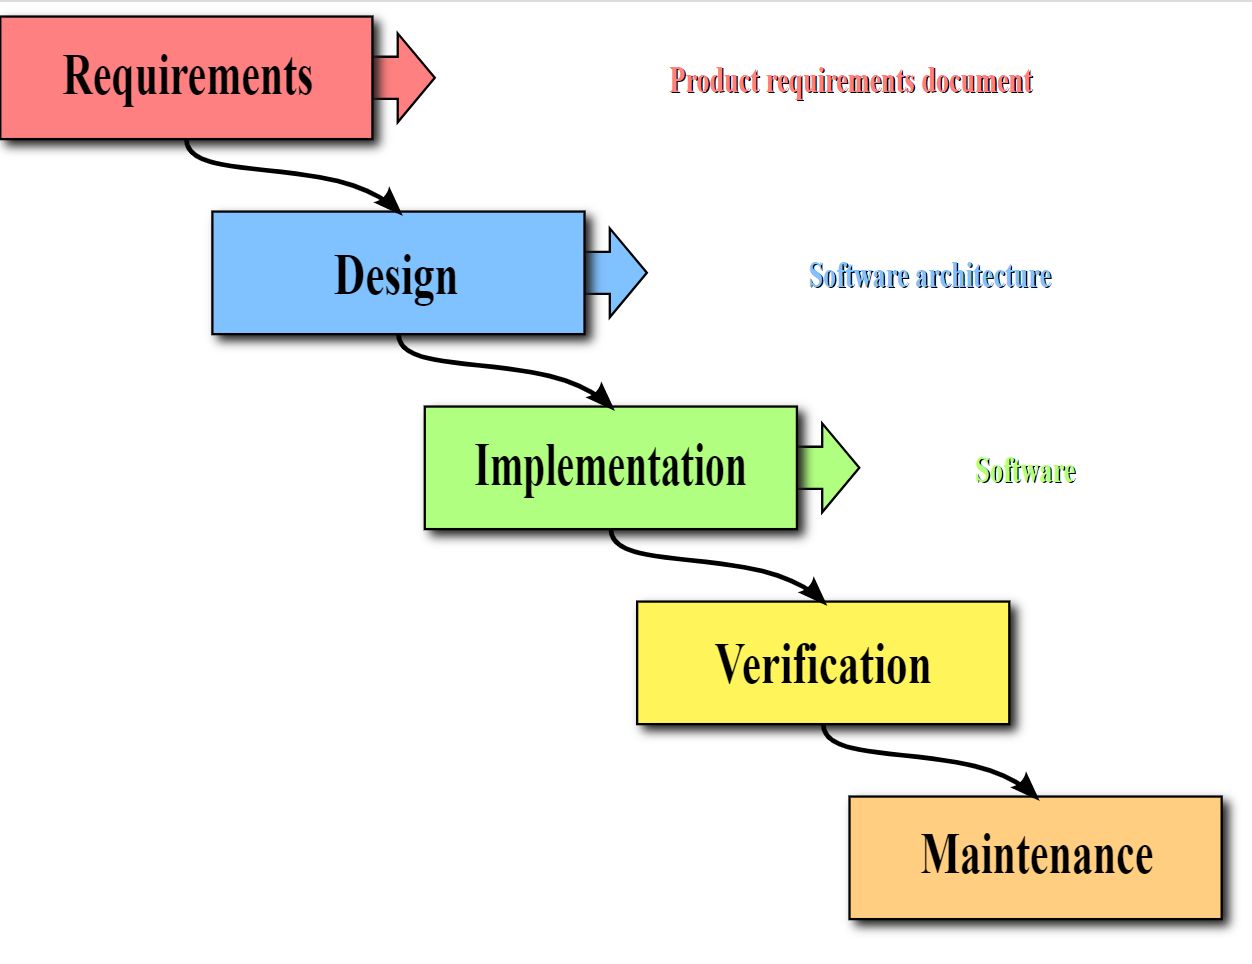 Five boxes with arrows pointing to the next phase.  The first box is labeled Requirements with an additional arrow to the text, Product requirement document.  The second box is labeled Design with an additional arrow to the text, Software architecture.  The third box is labeled Implementation with an additional arrow to the text, Software.  The next two boxes are Verification and Maintenance with no additional arrows.  